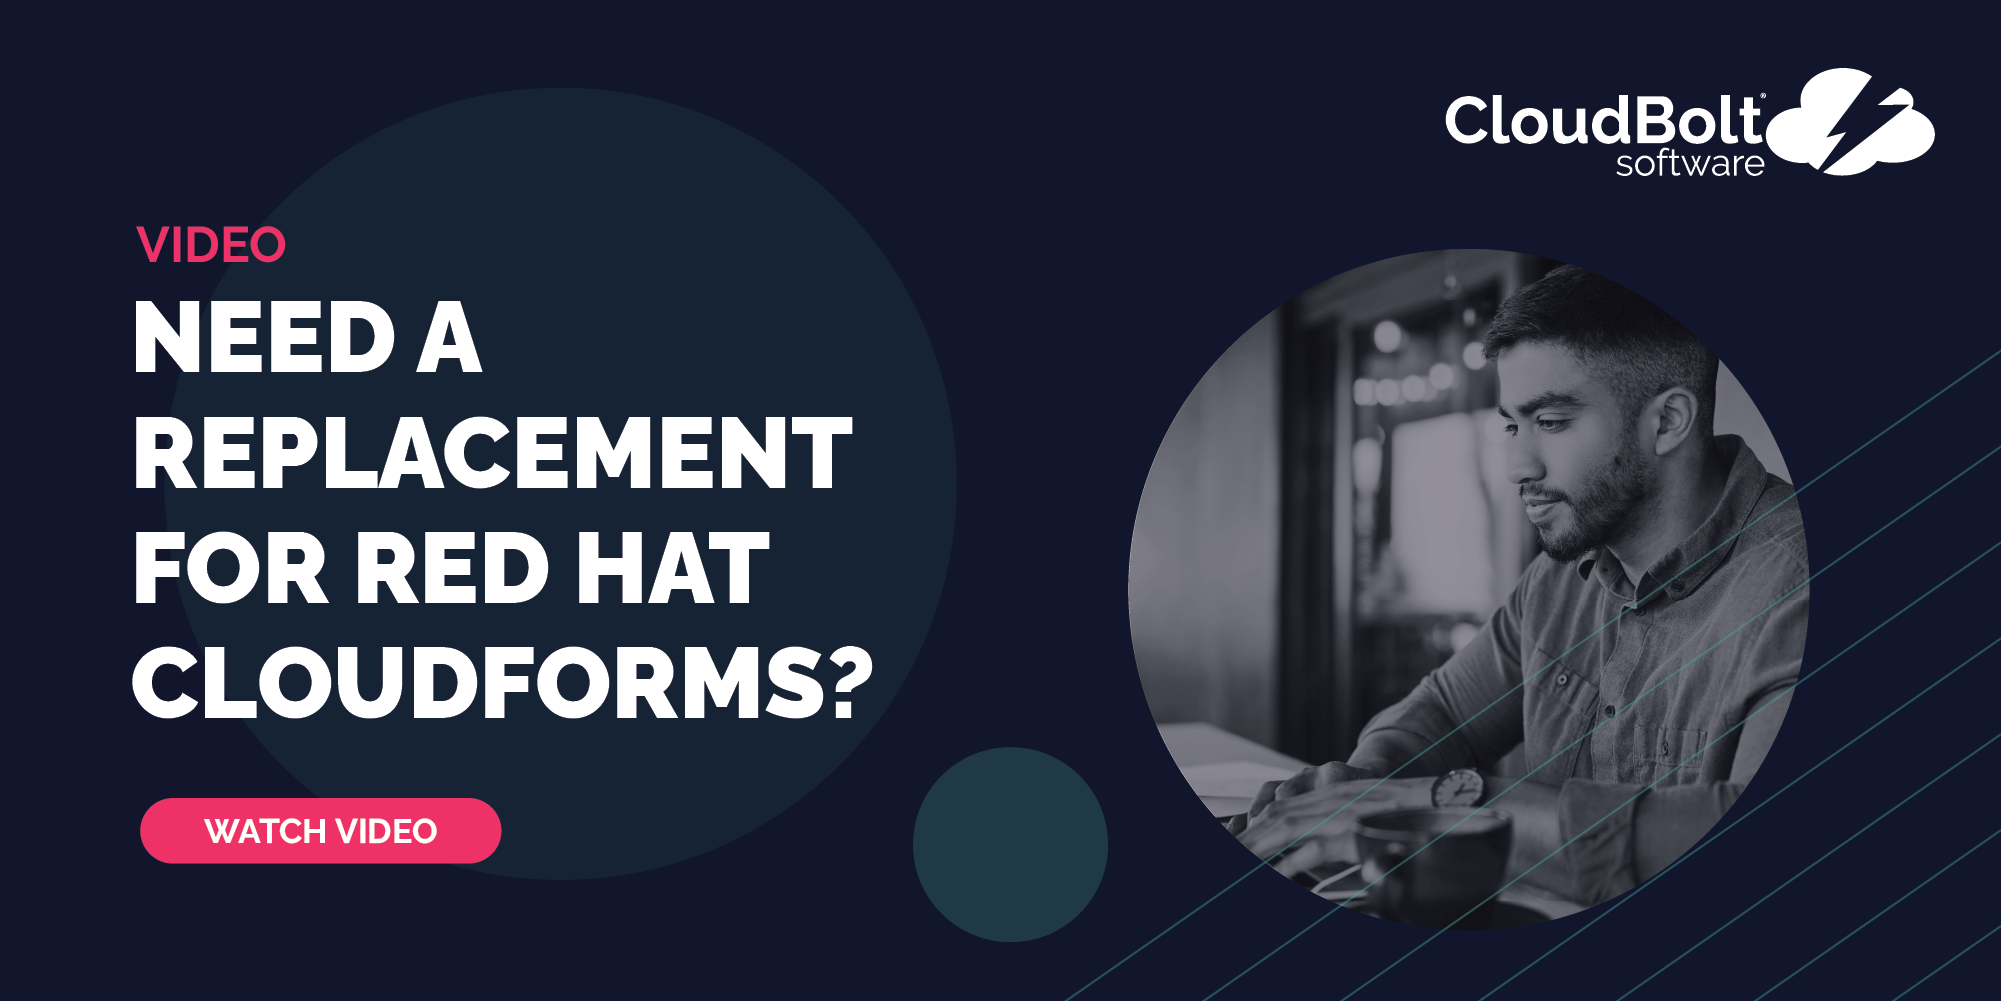 Need a replacement for Red Hat CloudForms?